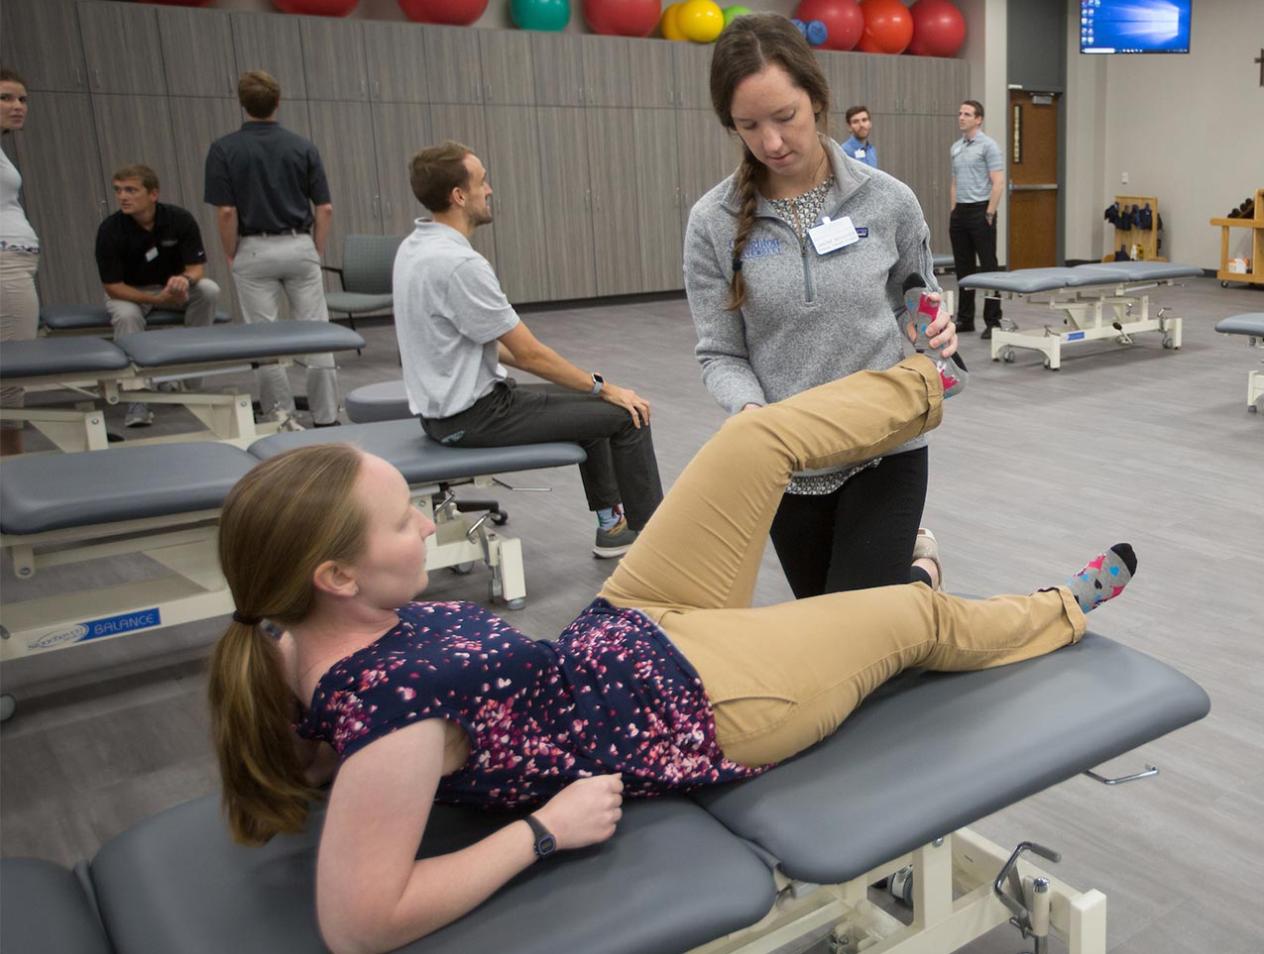 Physical Therapy student working with patient